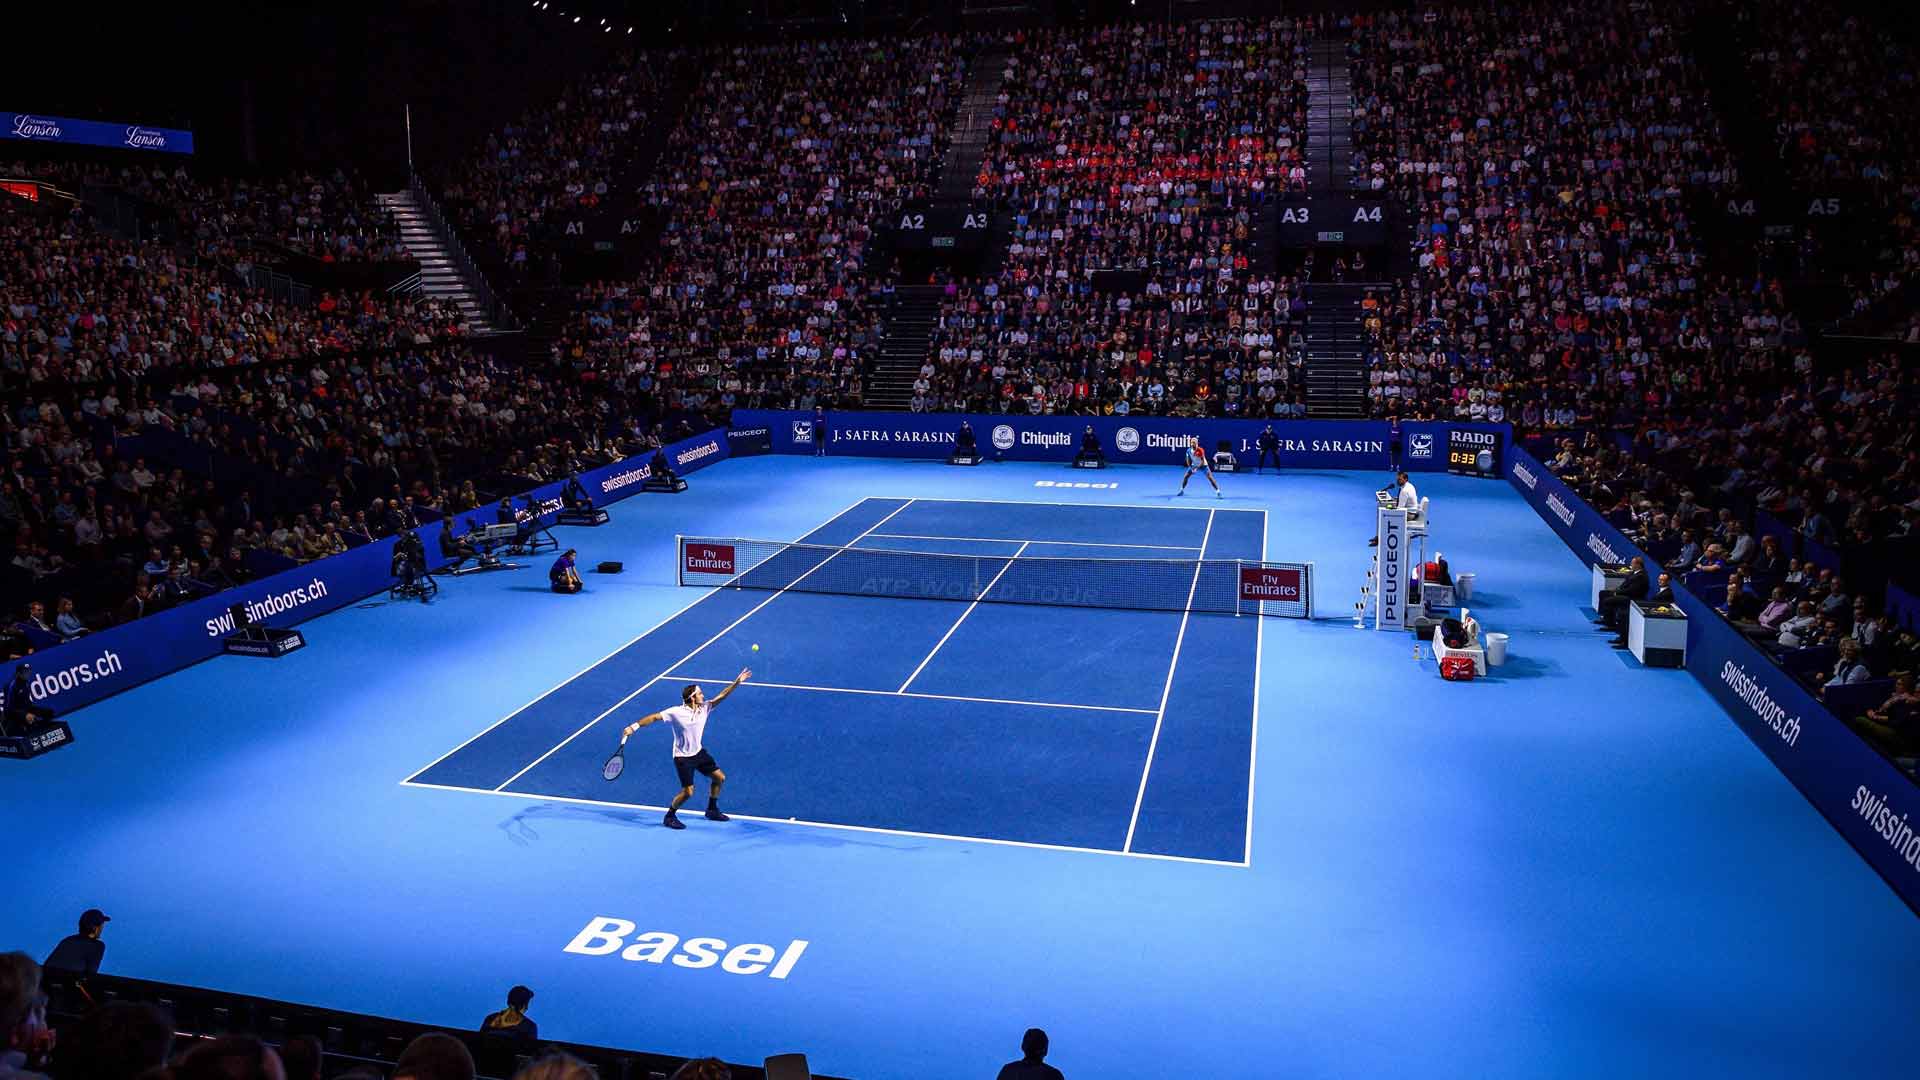 Swiss Indoors Basel 2022 LIVE Aliassime vs Rune in FINAL at 7.30 PM